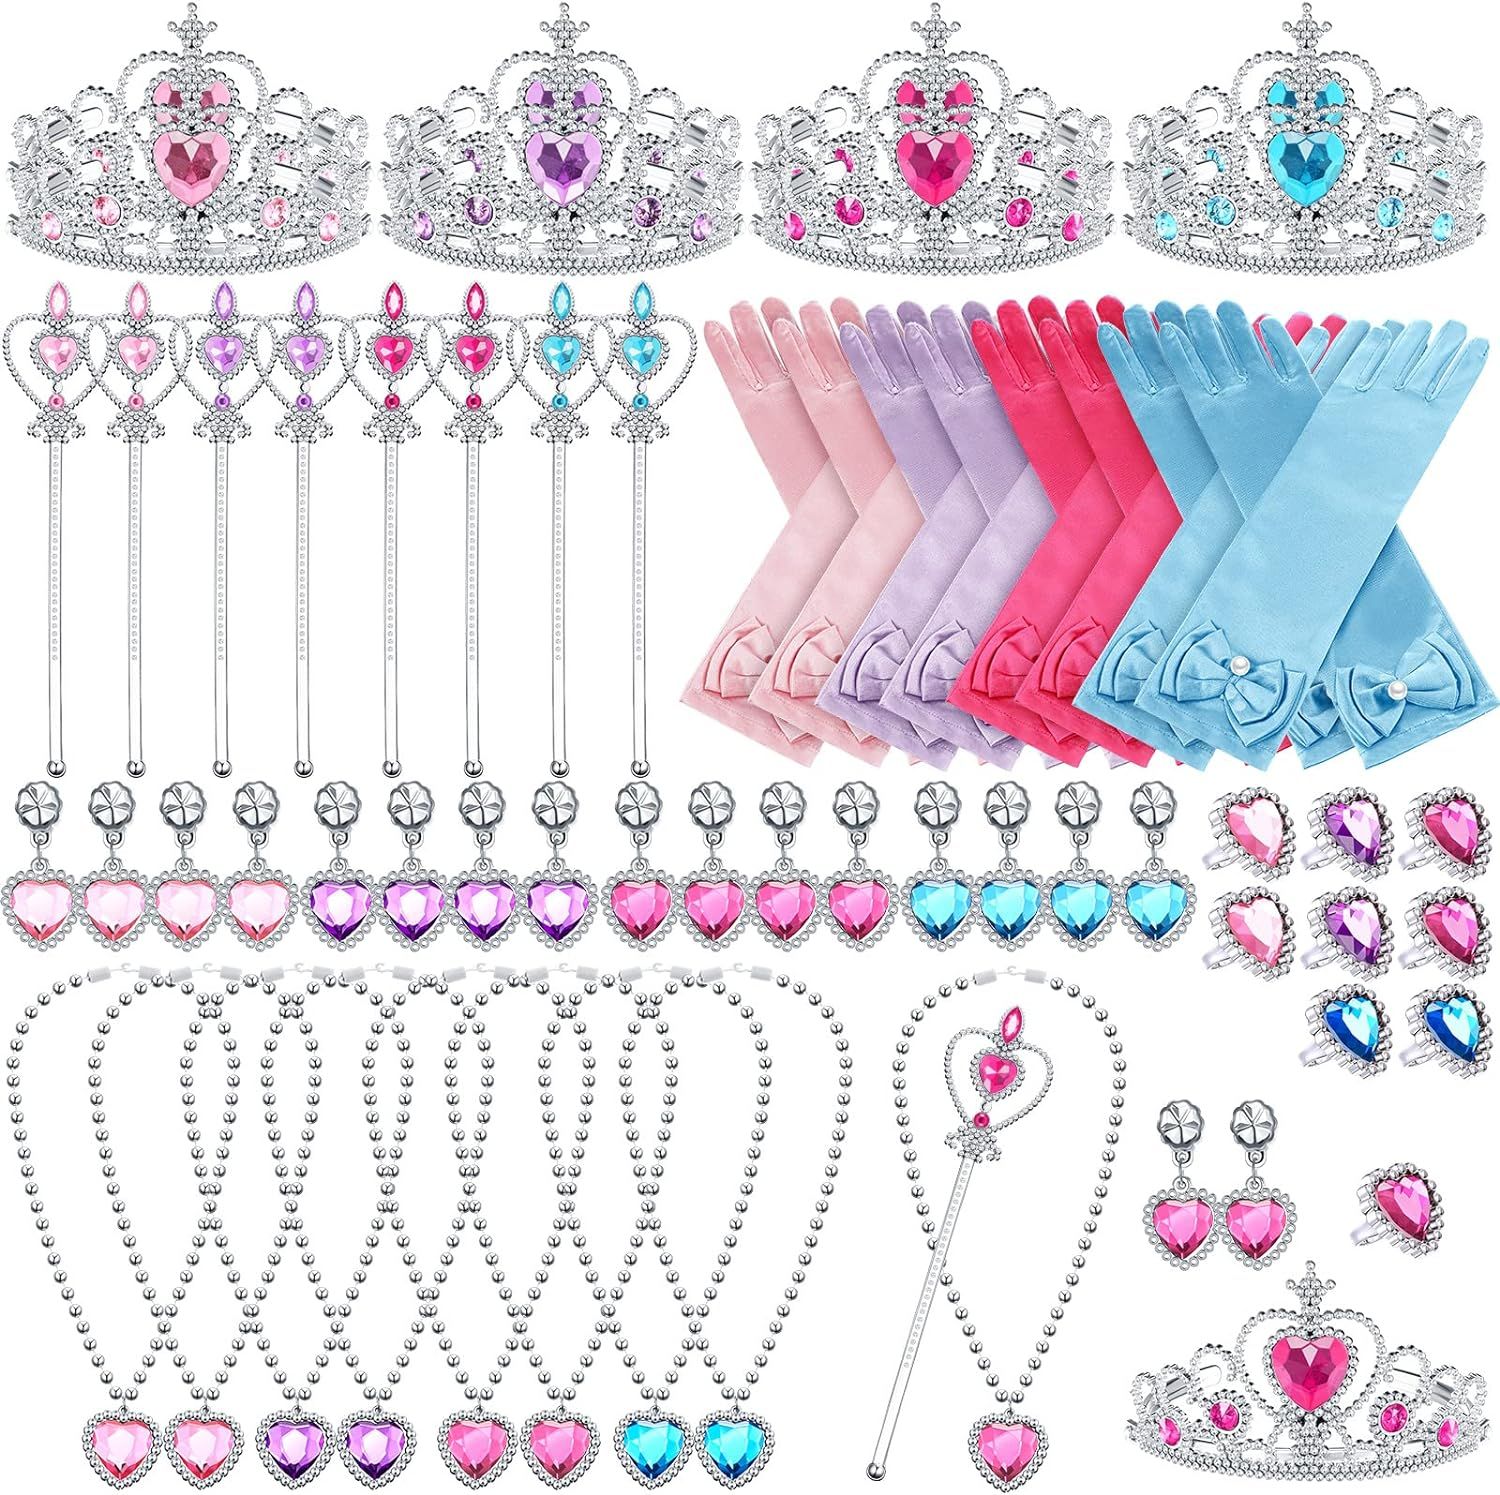 64 Pcs Princess Jewelry Toys for Girls, Princess Party Favors Dress up Accessories Included Crown... | Amazon (US)